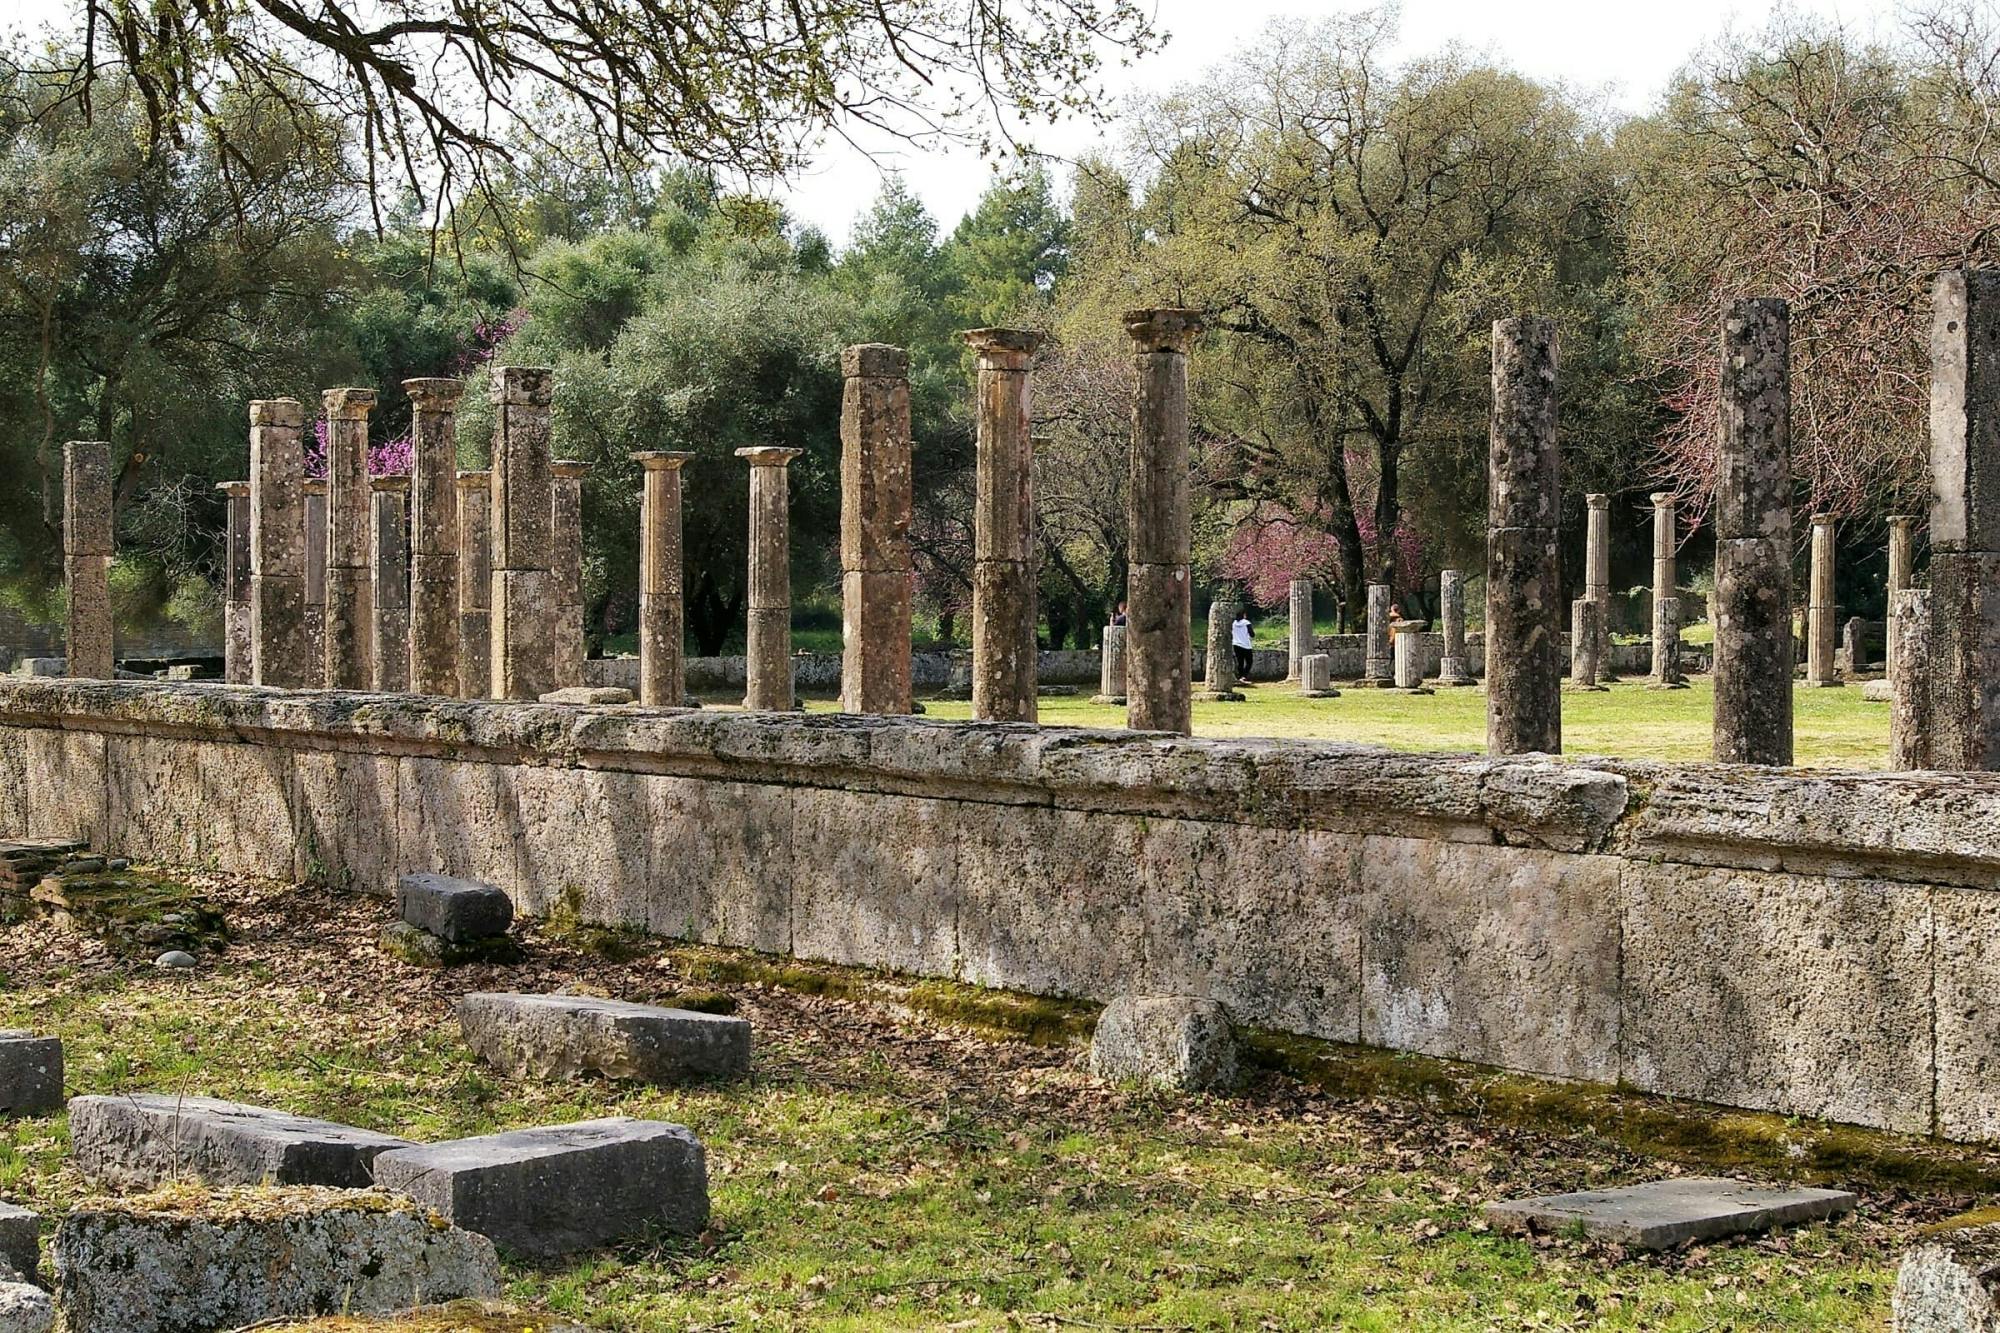 Guided tour of Ancient Olympia with an iPad